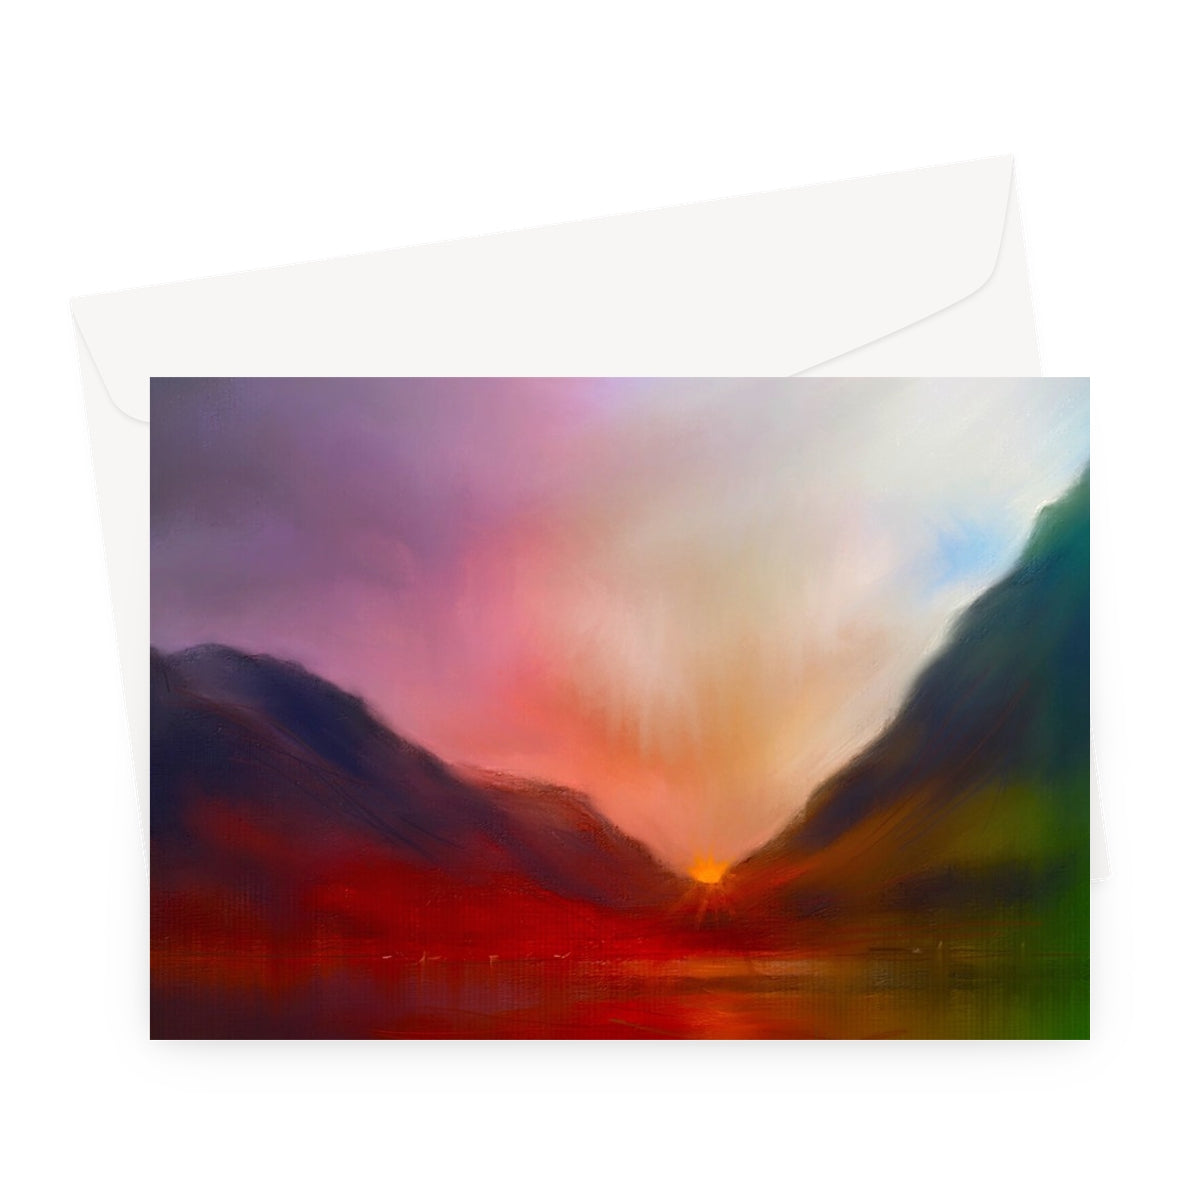 Glencoe Sunset Art Gifts Greeting Card-Greetings Cards-Glencoe Art Gallery-A5 Landscape-1 Card-Paintings, Prints, Homeware, Art Gifts From Scotland By Scottish Artist Kevin Hunter